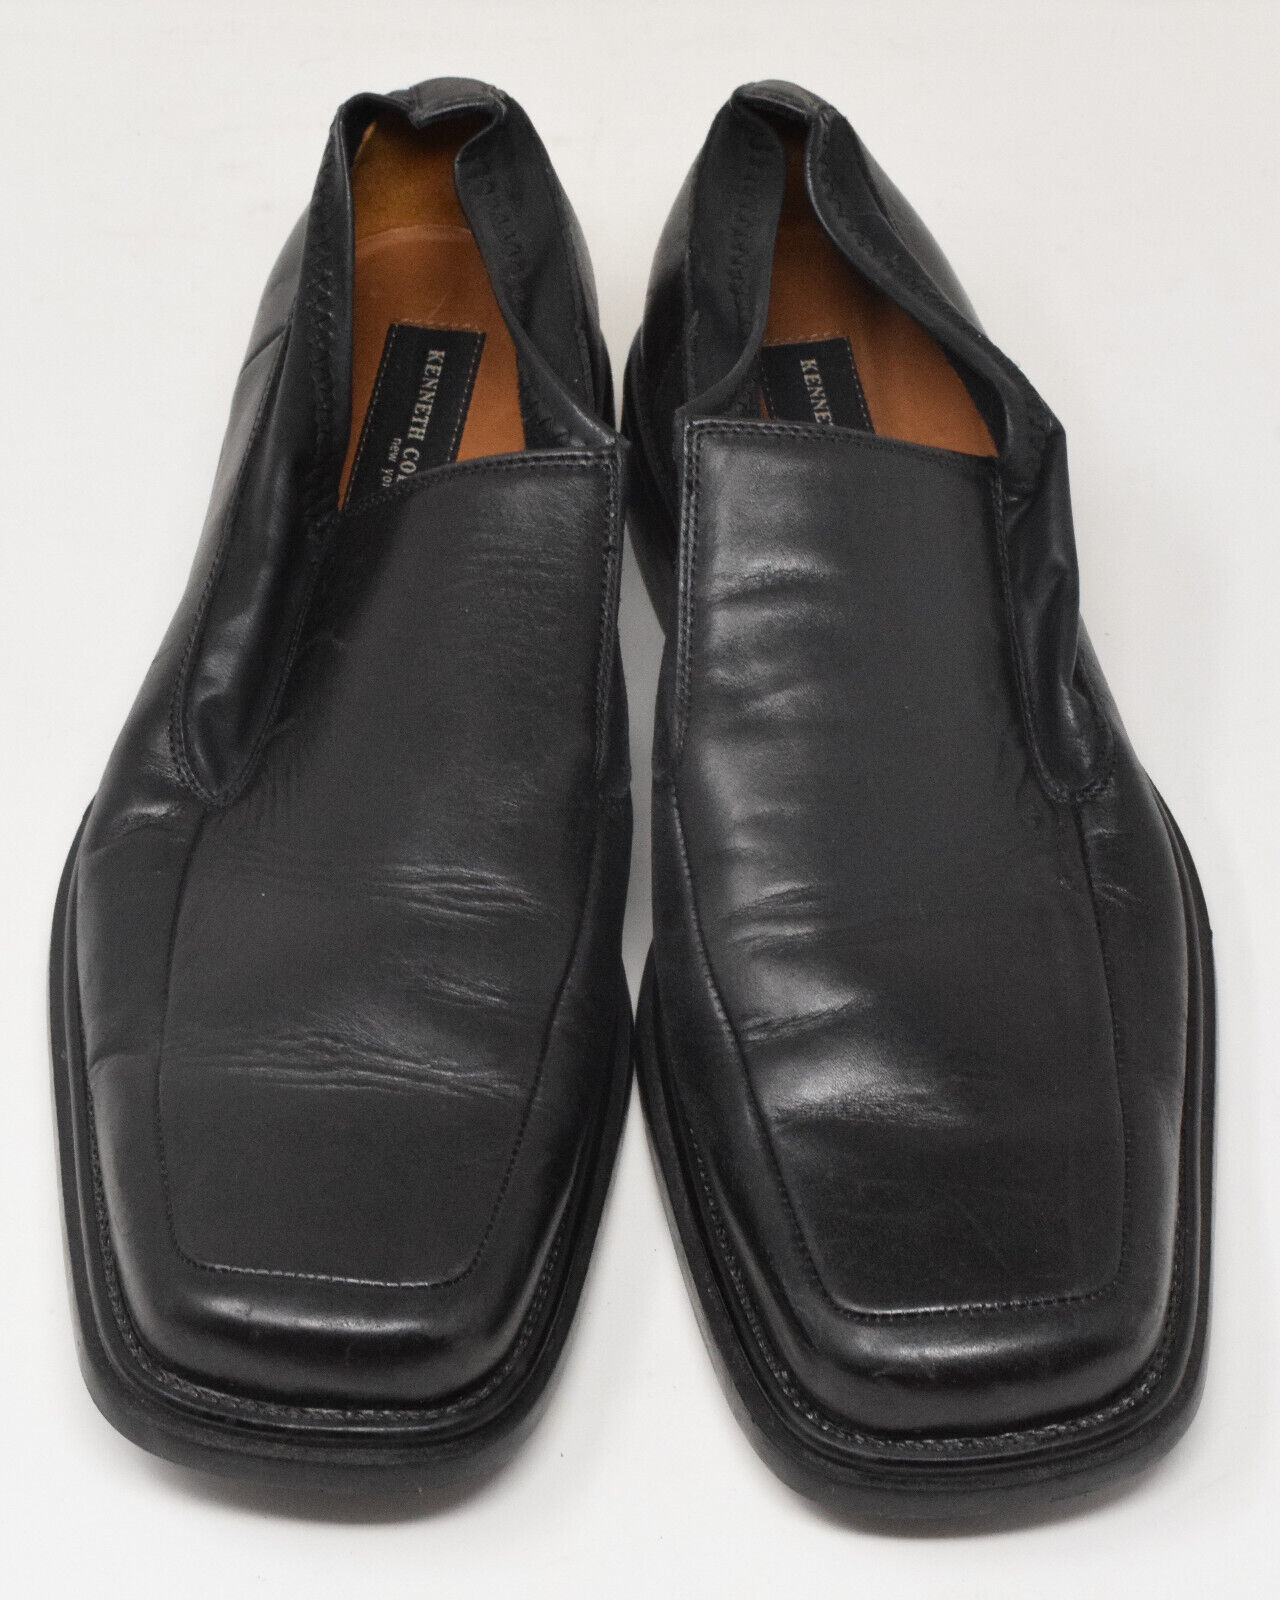 Primary image for Kenneth Cole Mens Loafer Soft Leather Black Dress Shoes 10